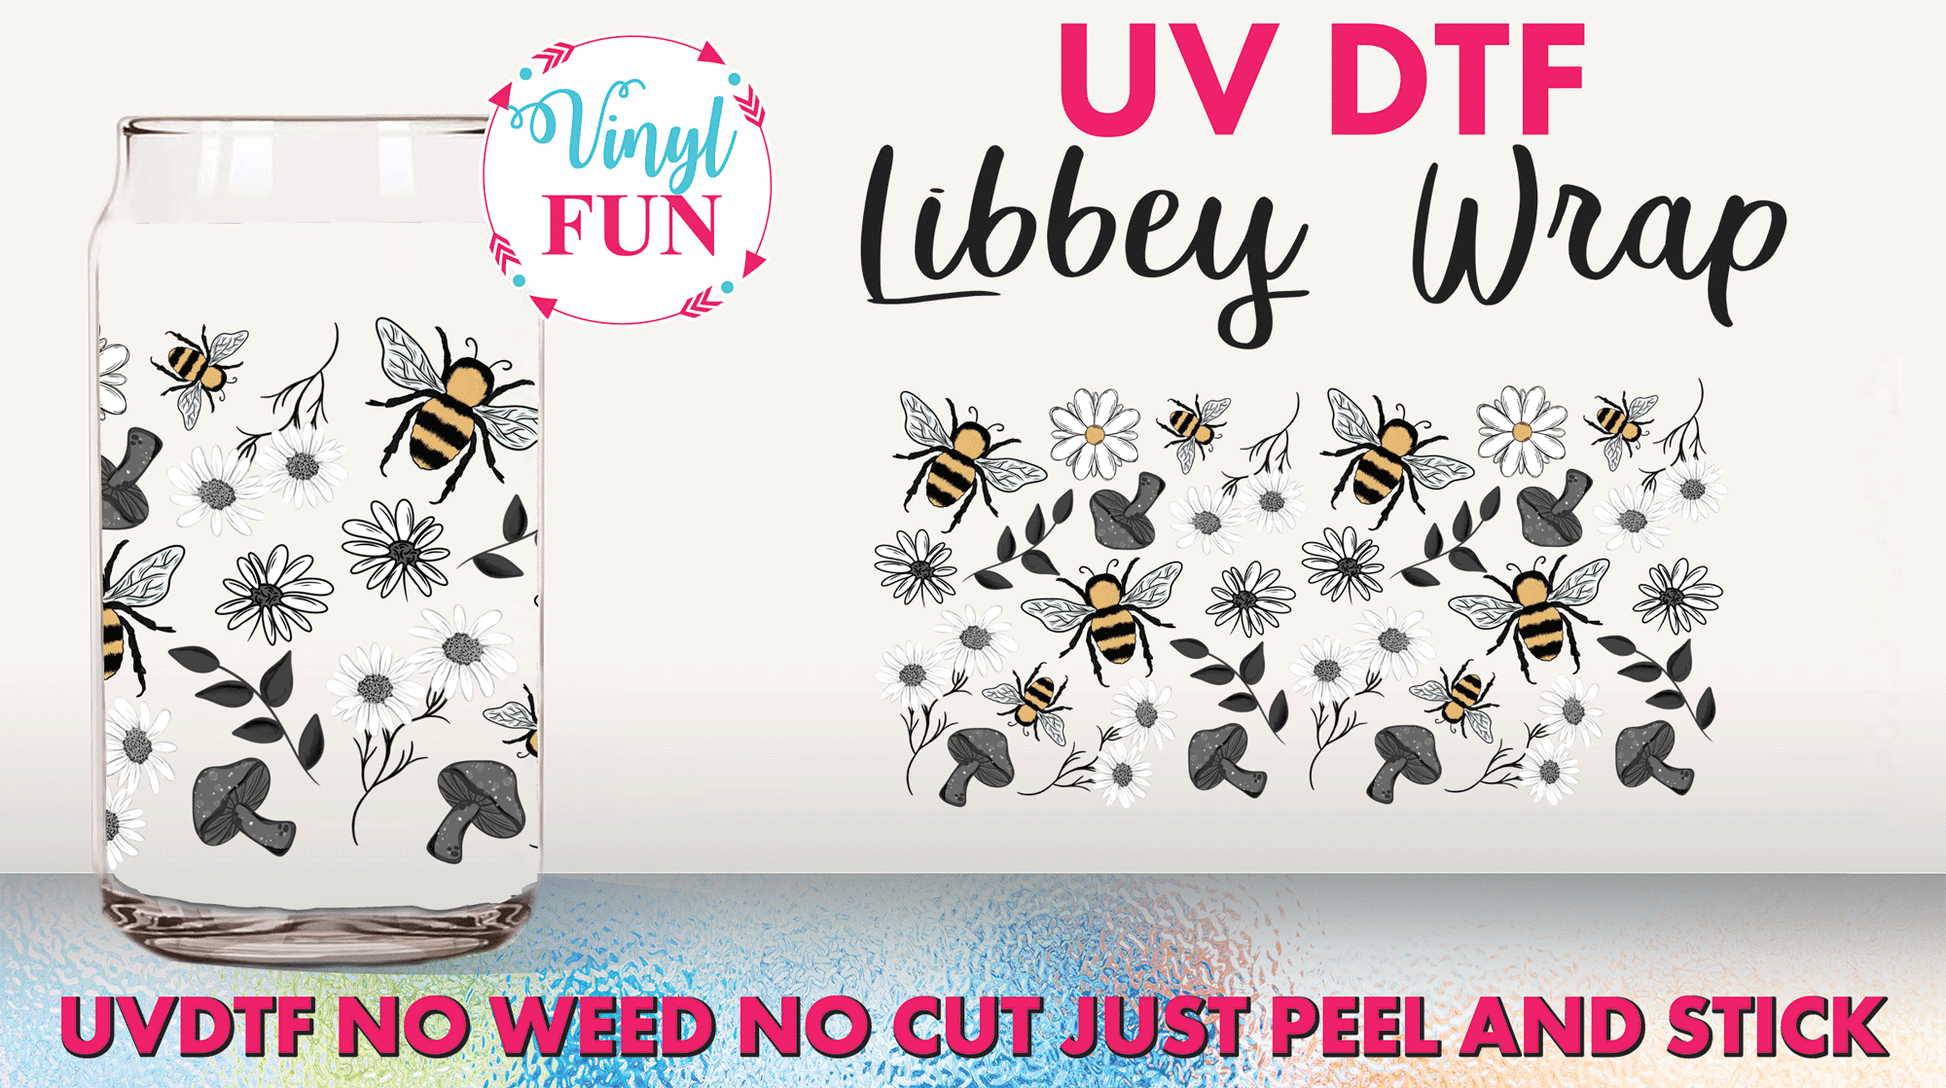 UV DTF Sticker Customized For The 16oz Libbey Glasses Wraps Cup Can DIY  Waterproof Easy To Use Custom Decals 1 Sheets